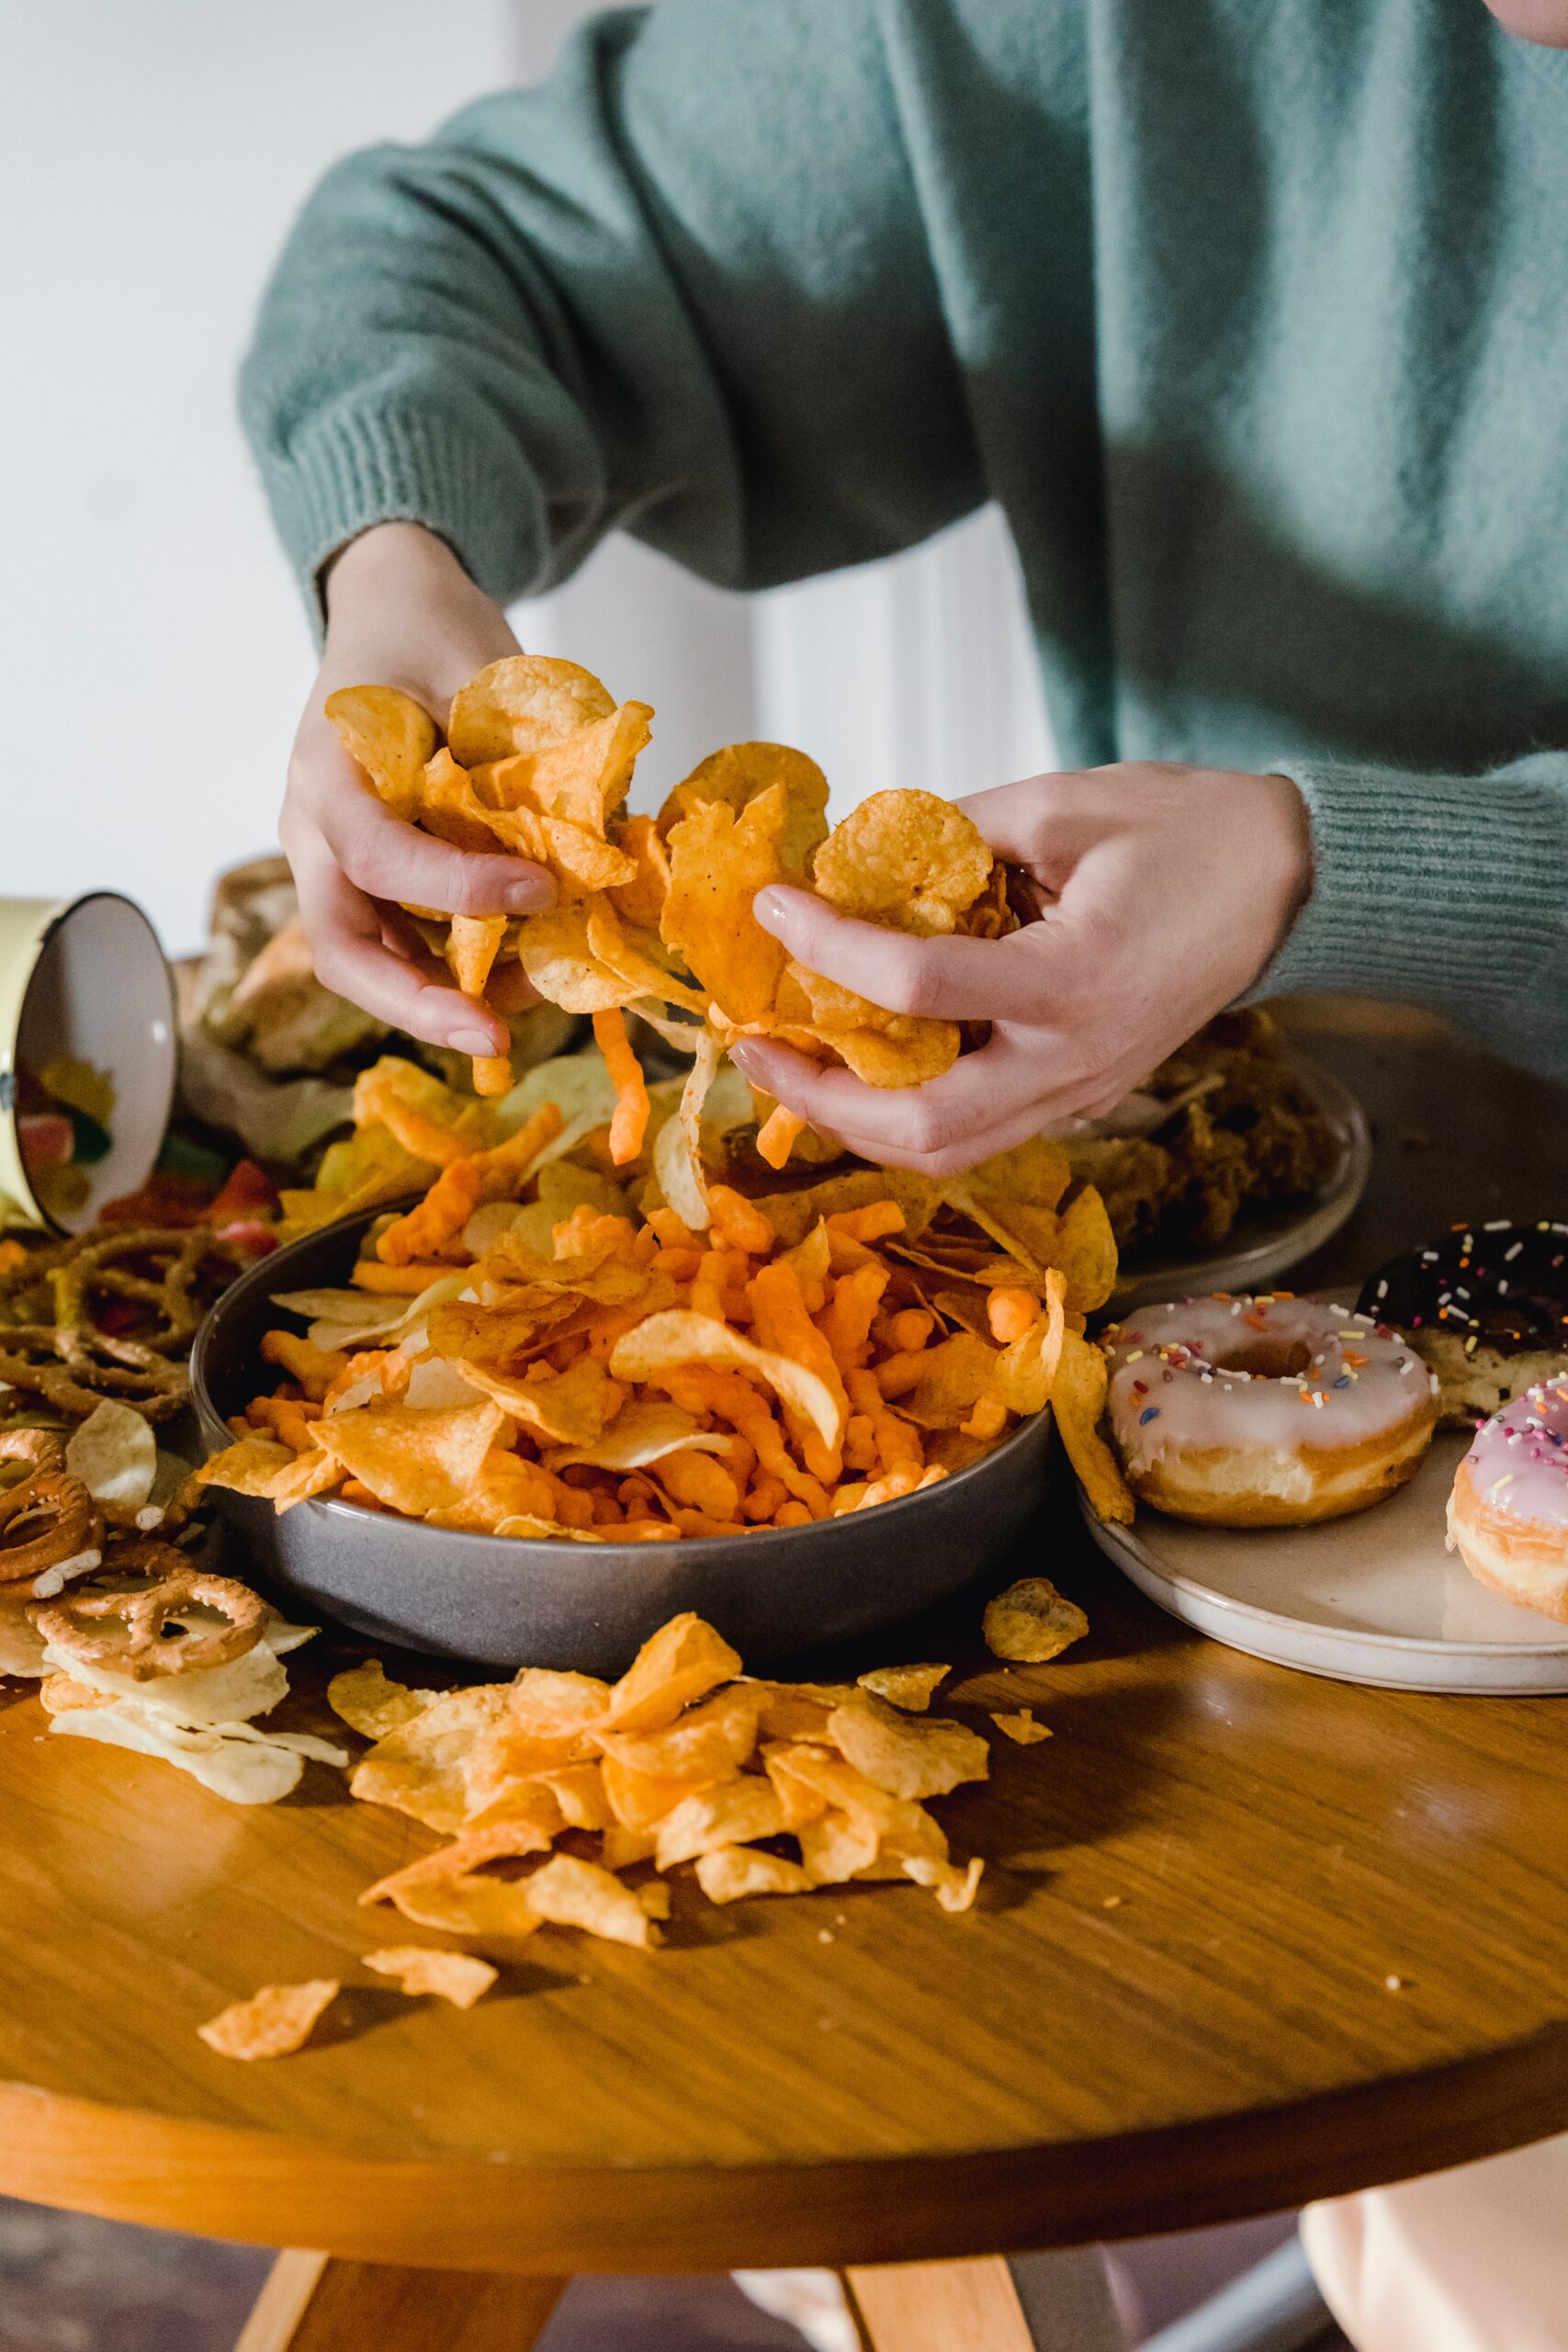 binge eating chips and donuts - what is binge eating